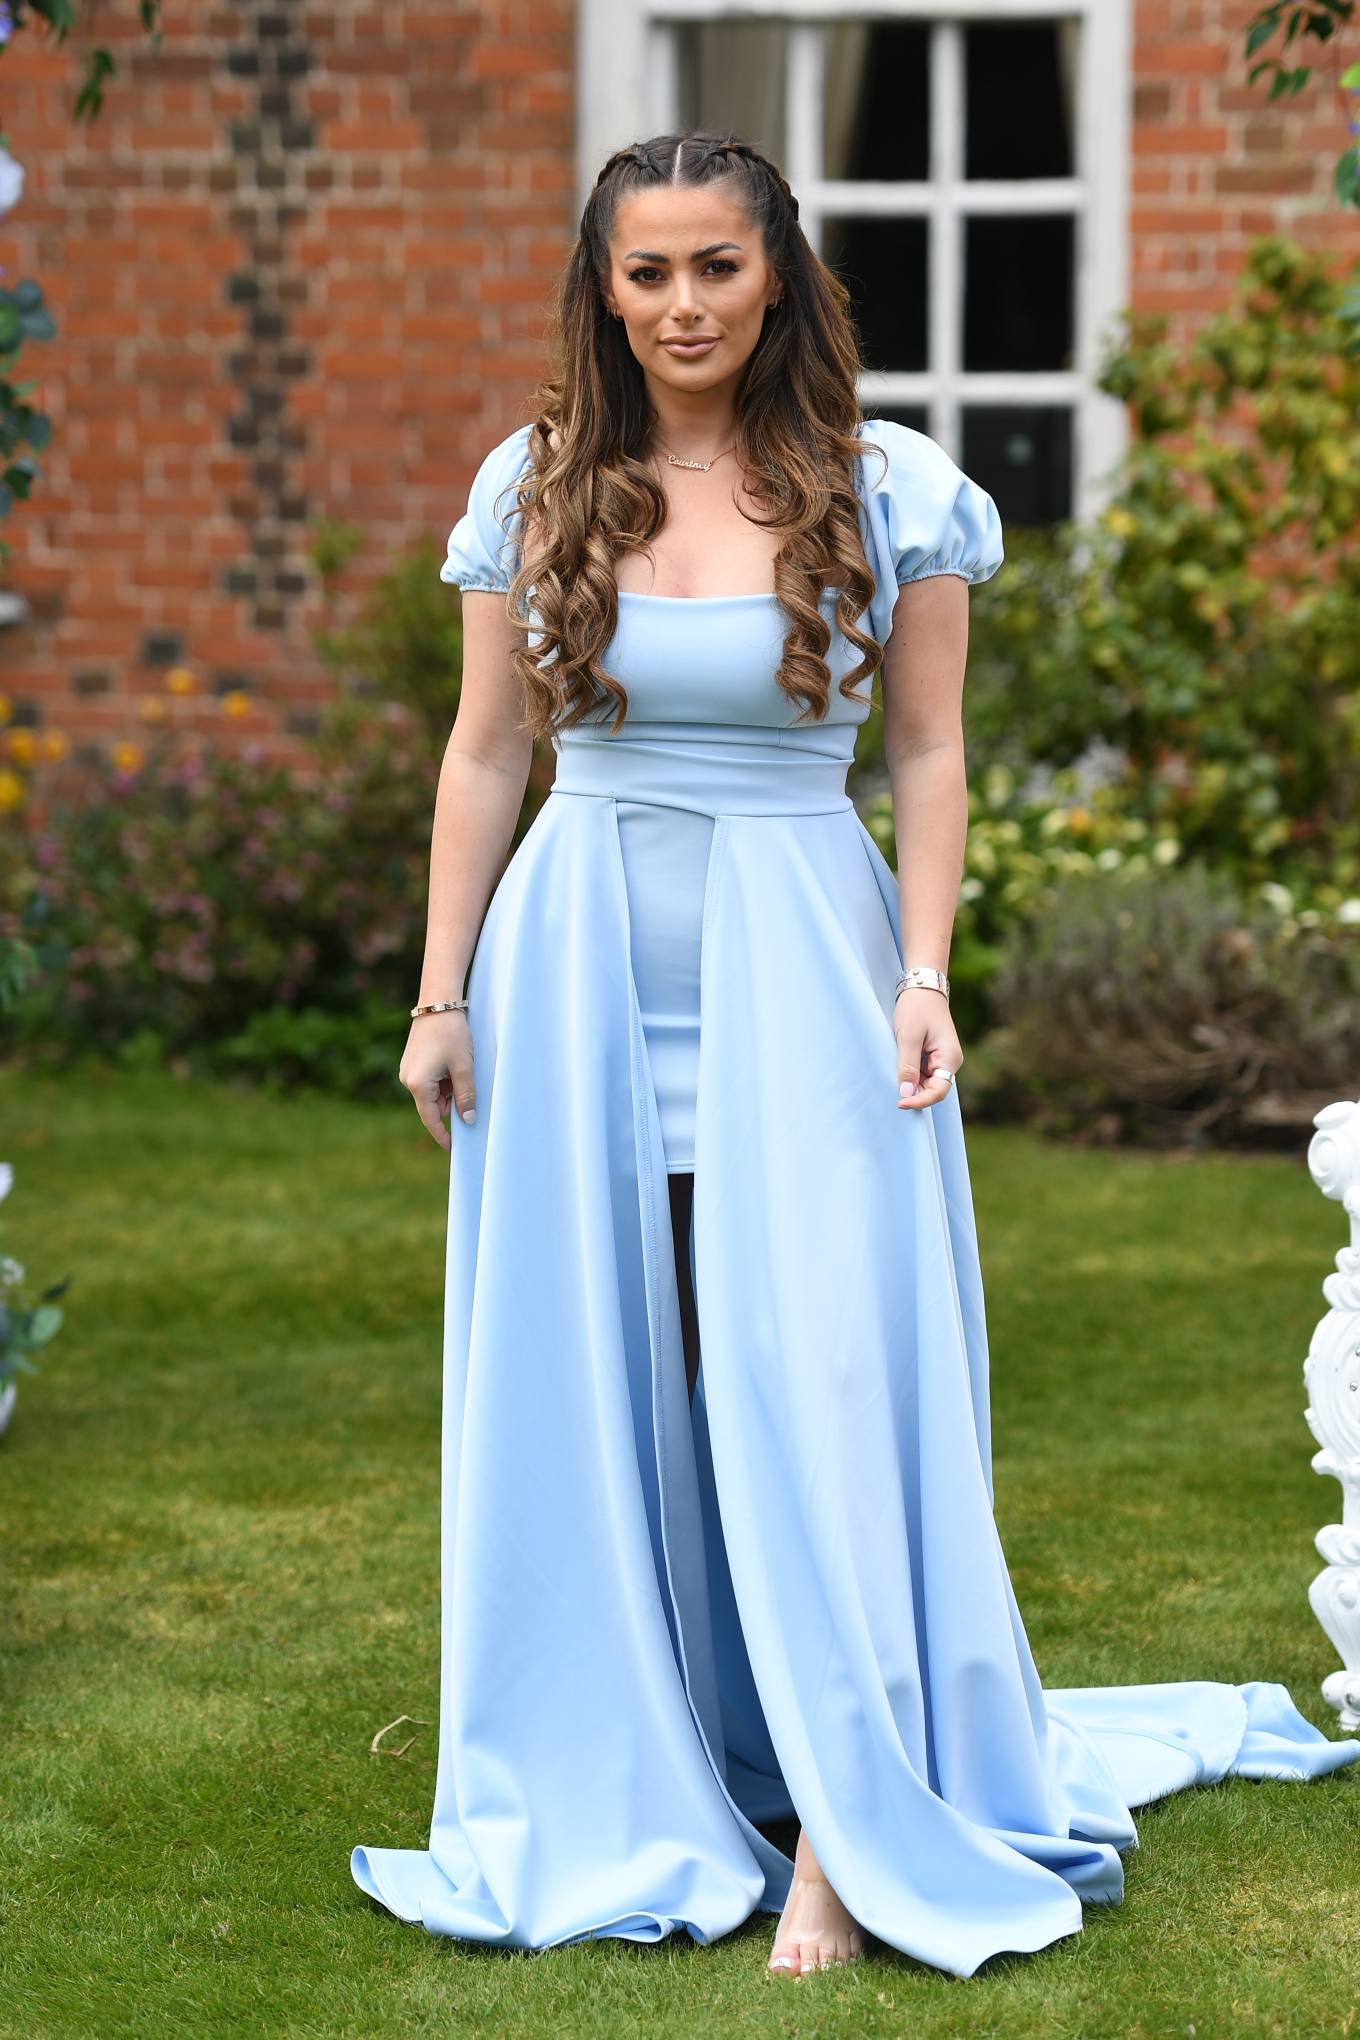 Courtney Green 2021 : Courtney Green – The Only Way is Essex TV Show filming – Bridgerton Special in Essex-04